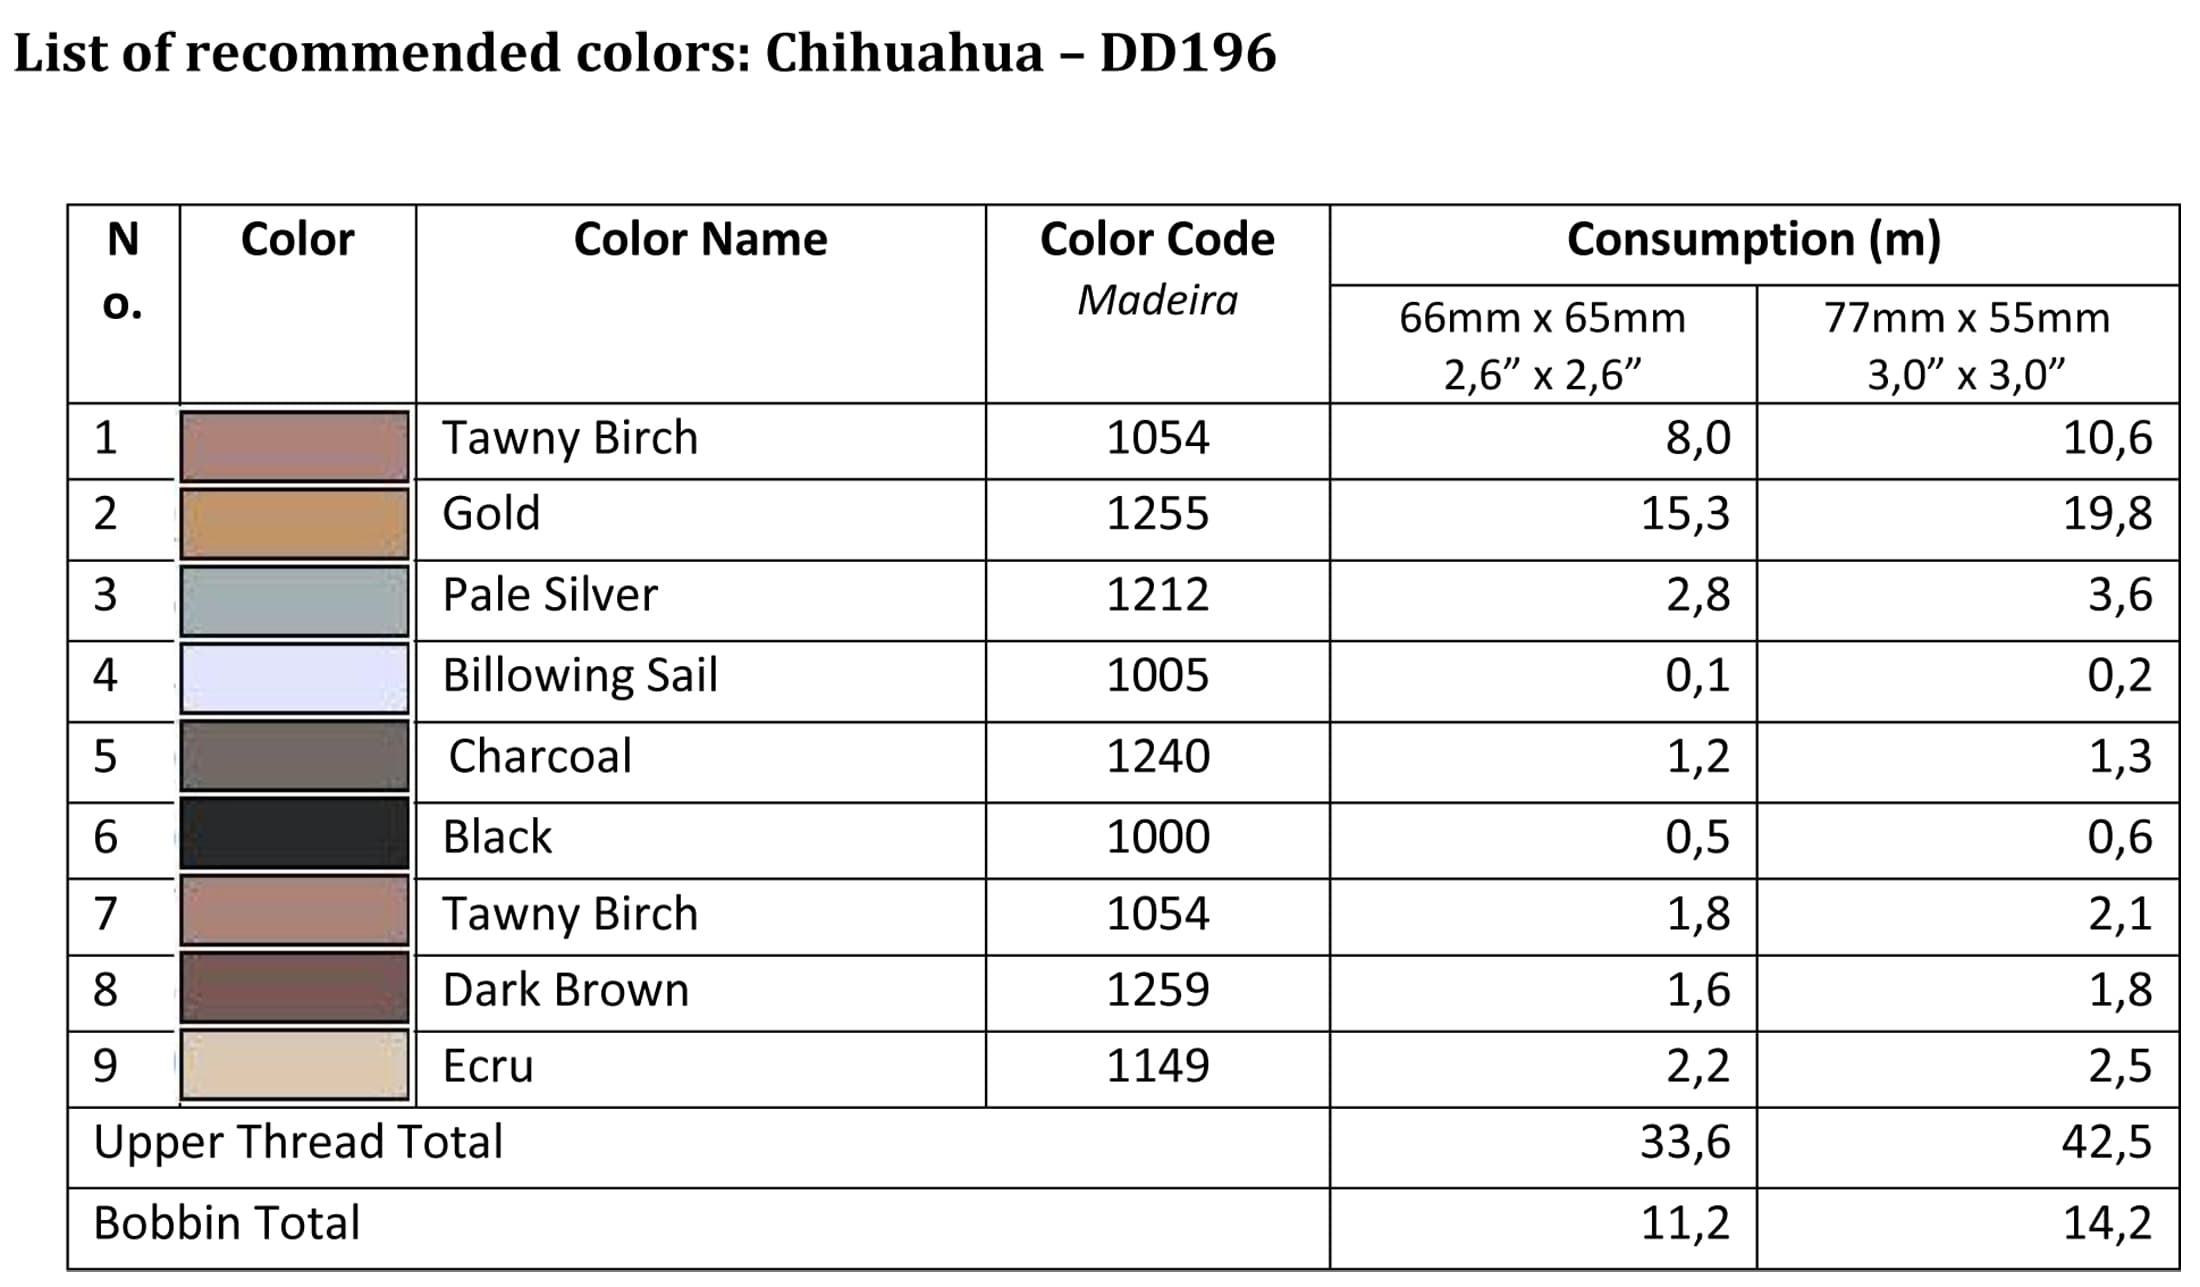 List of recommended colors - DD196